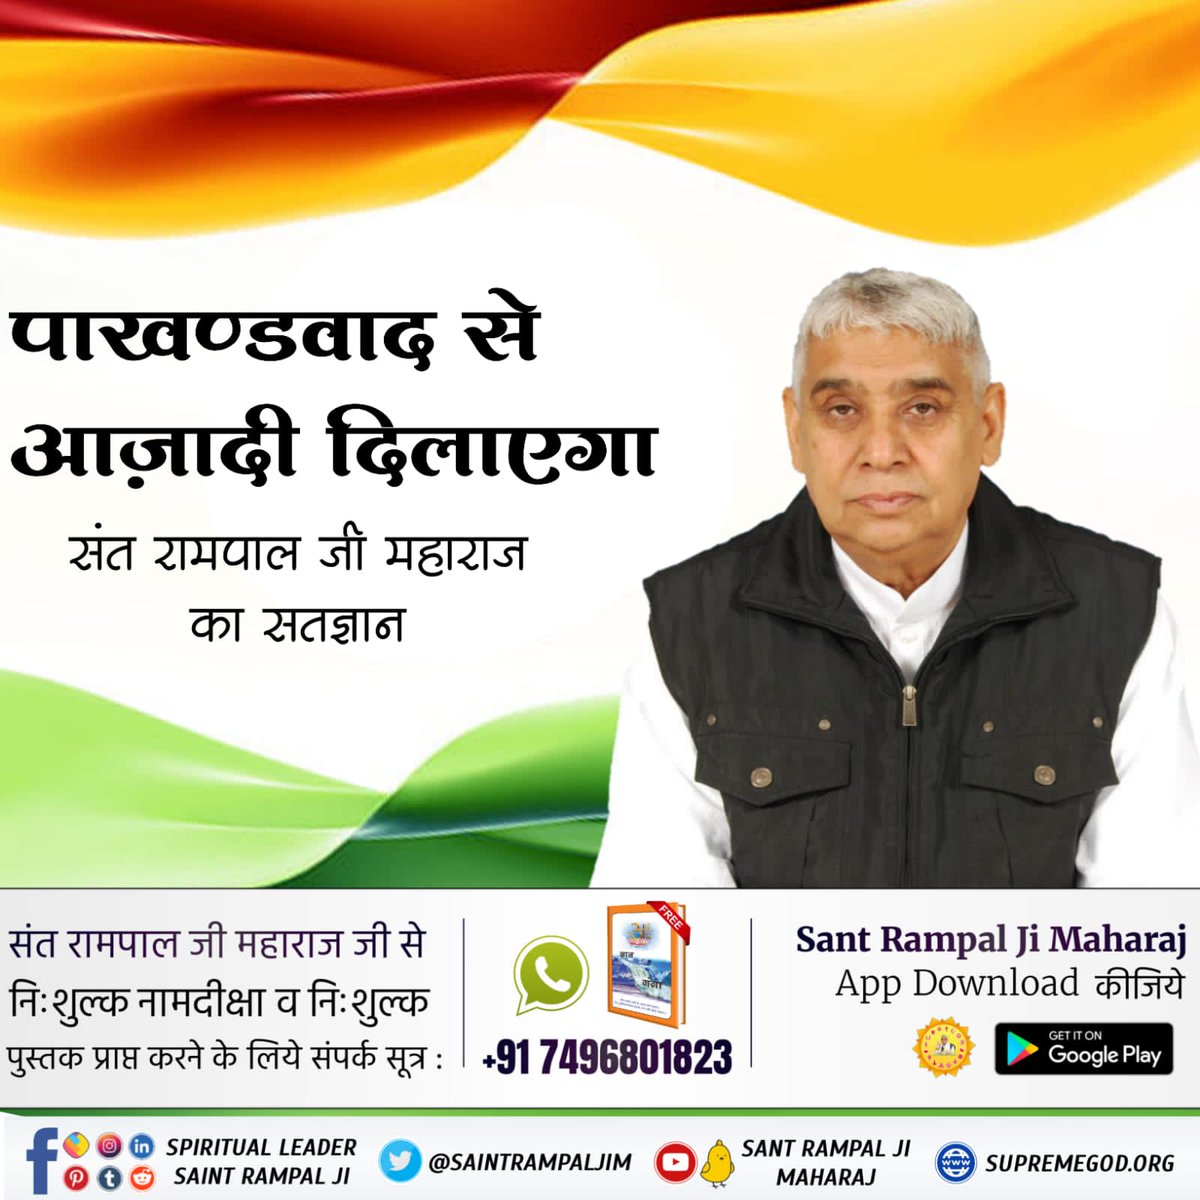 Sant Rampal Ji Maharaj has initiated and led a strong movement against all sorts of social evils, that are barriers in the path of worship as well as great hindrances for humanity. #FreedomFromEvils